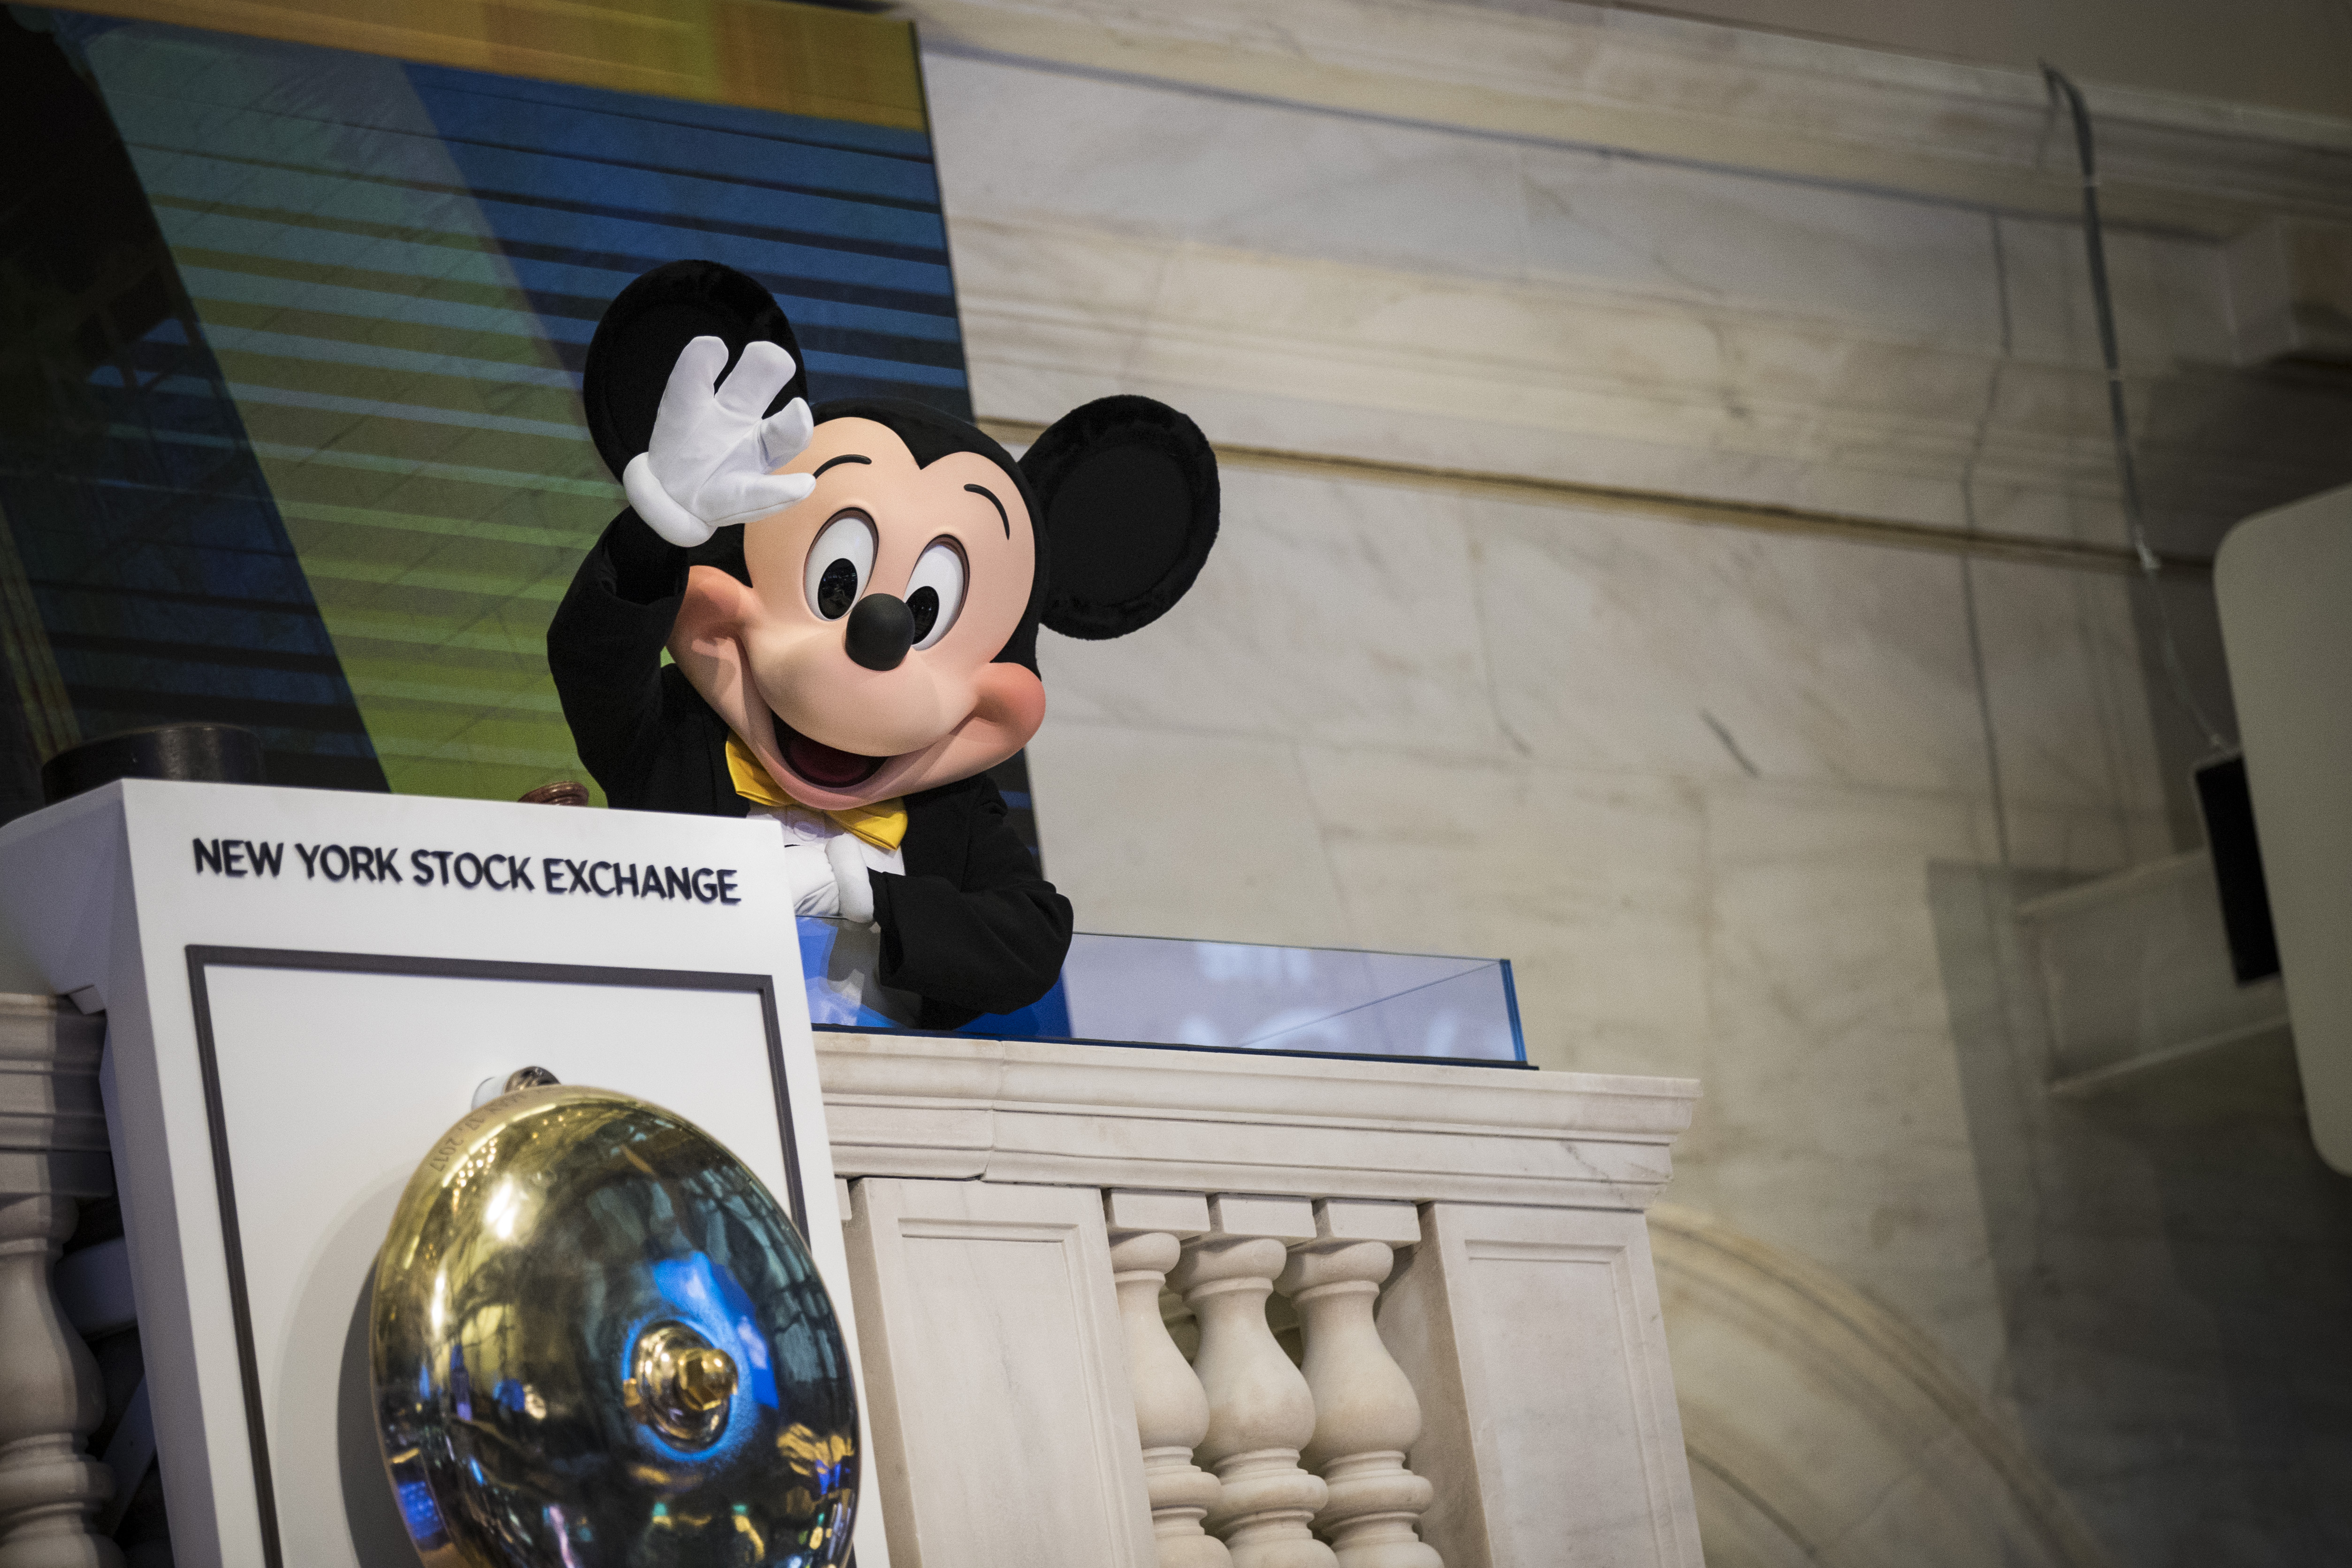 One Investor Goes All In On Disney With The Hopes Of Expanding Executive Board